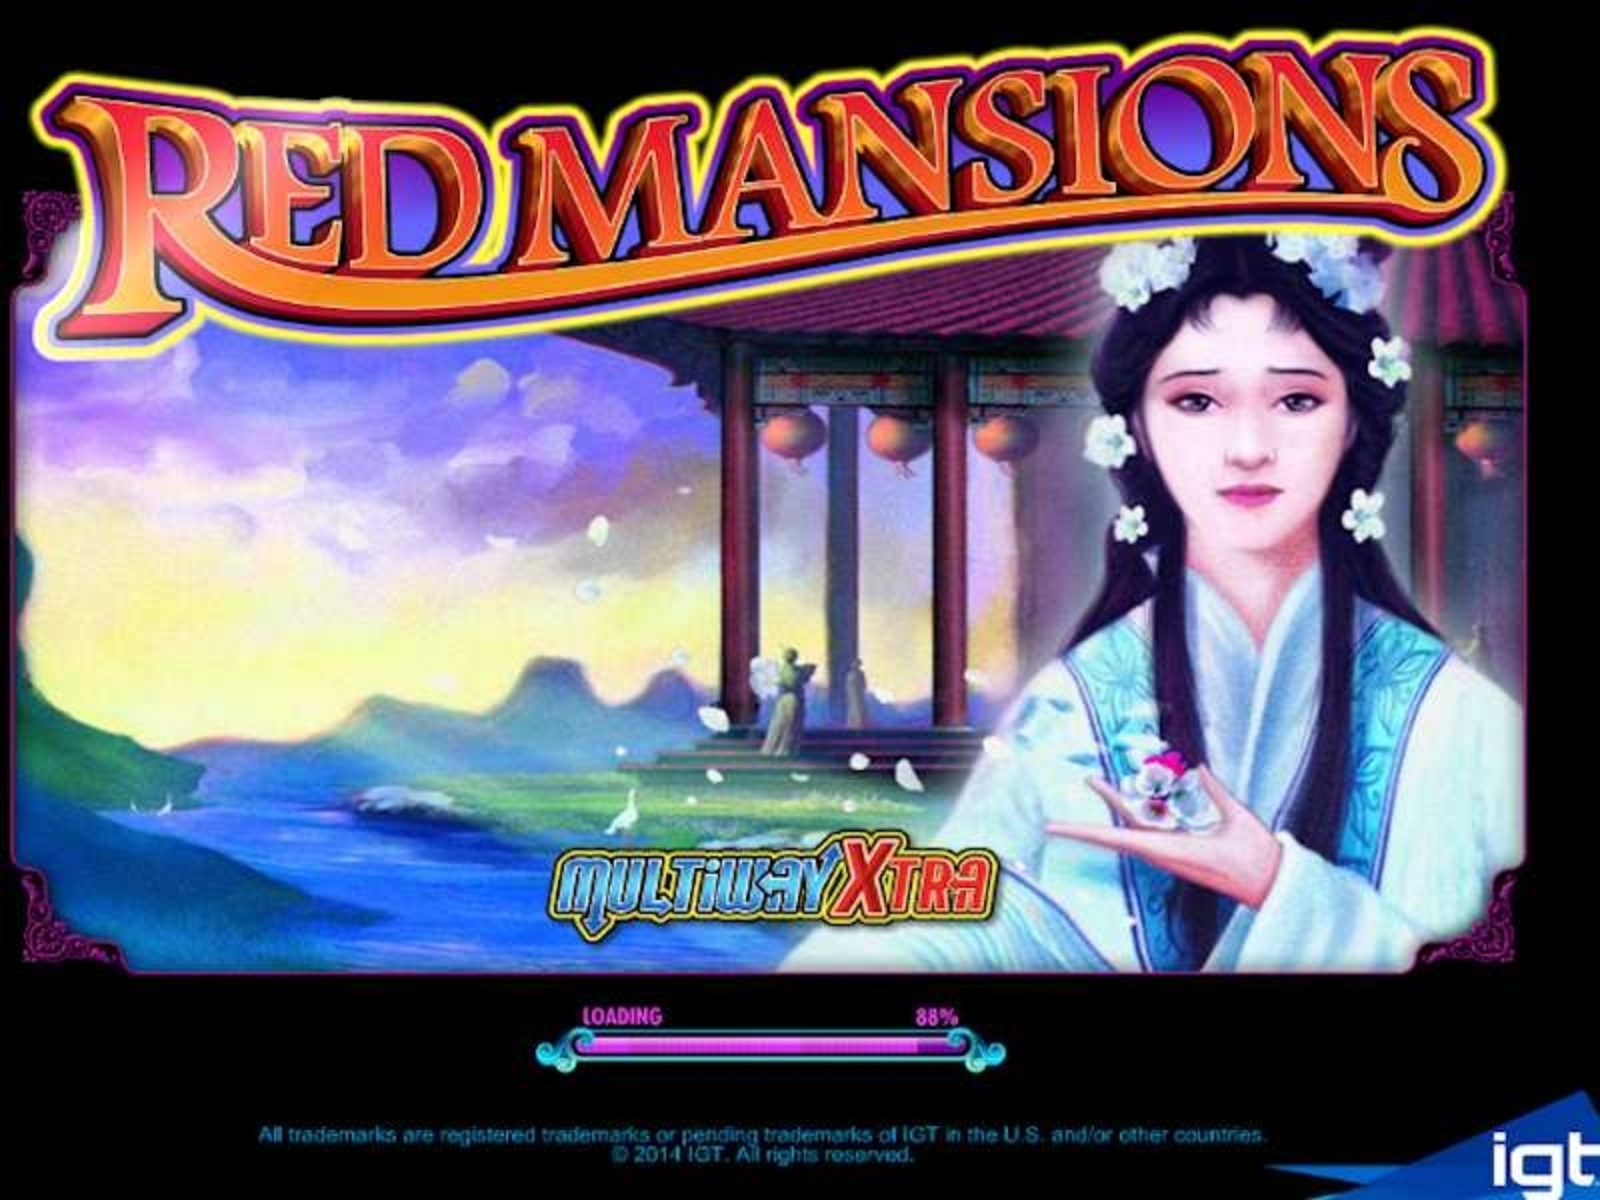 The Red Mansions Online Slot Demo Game by IGT